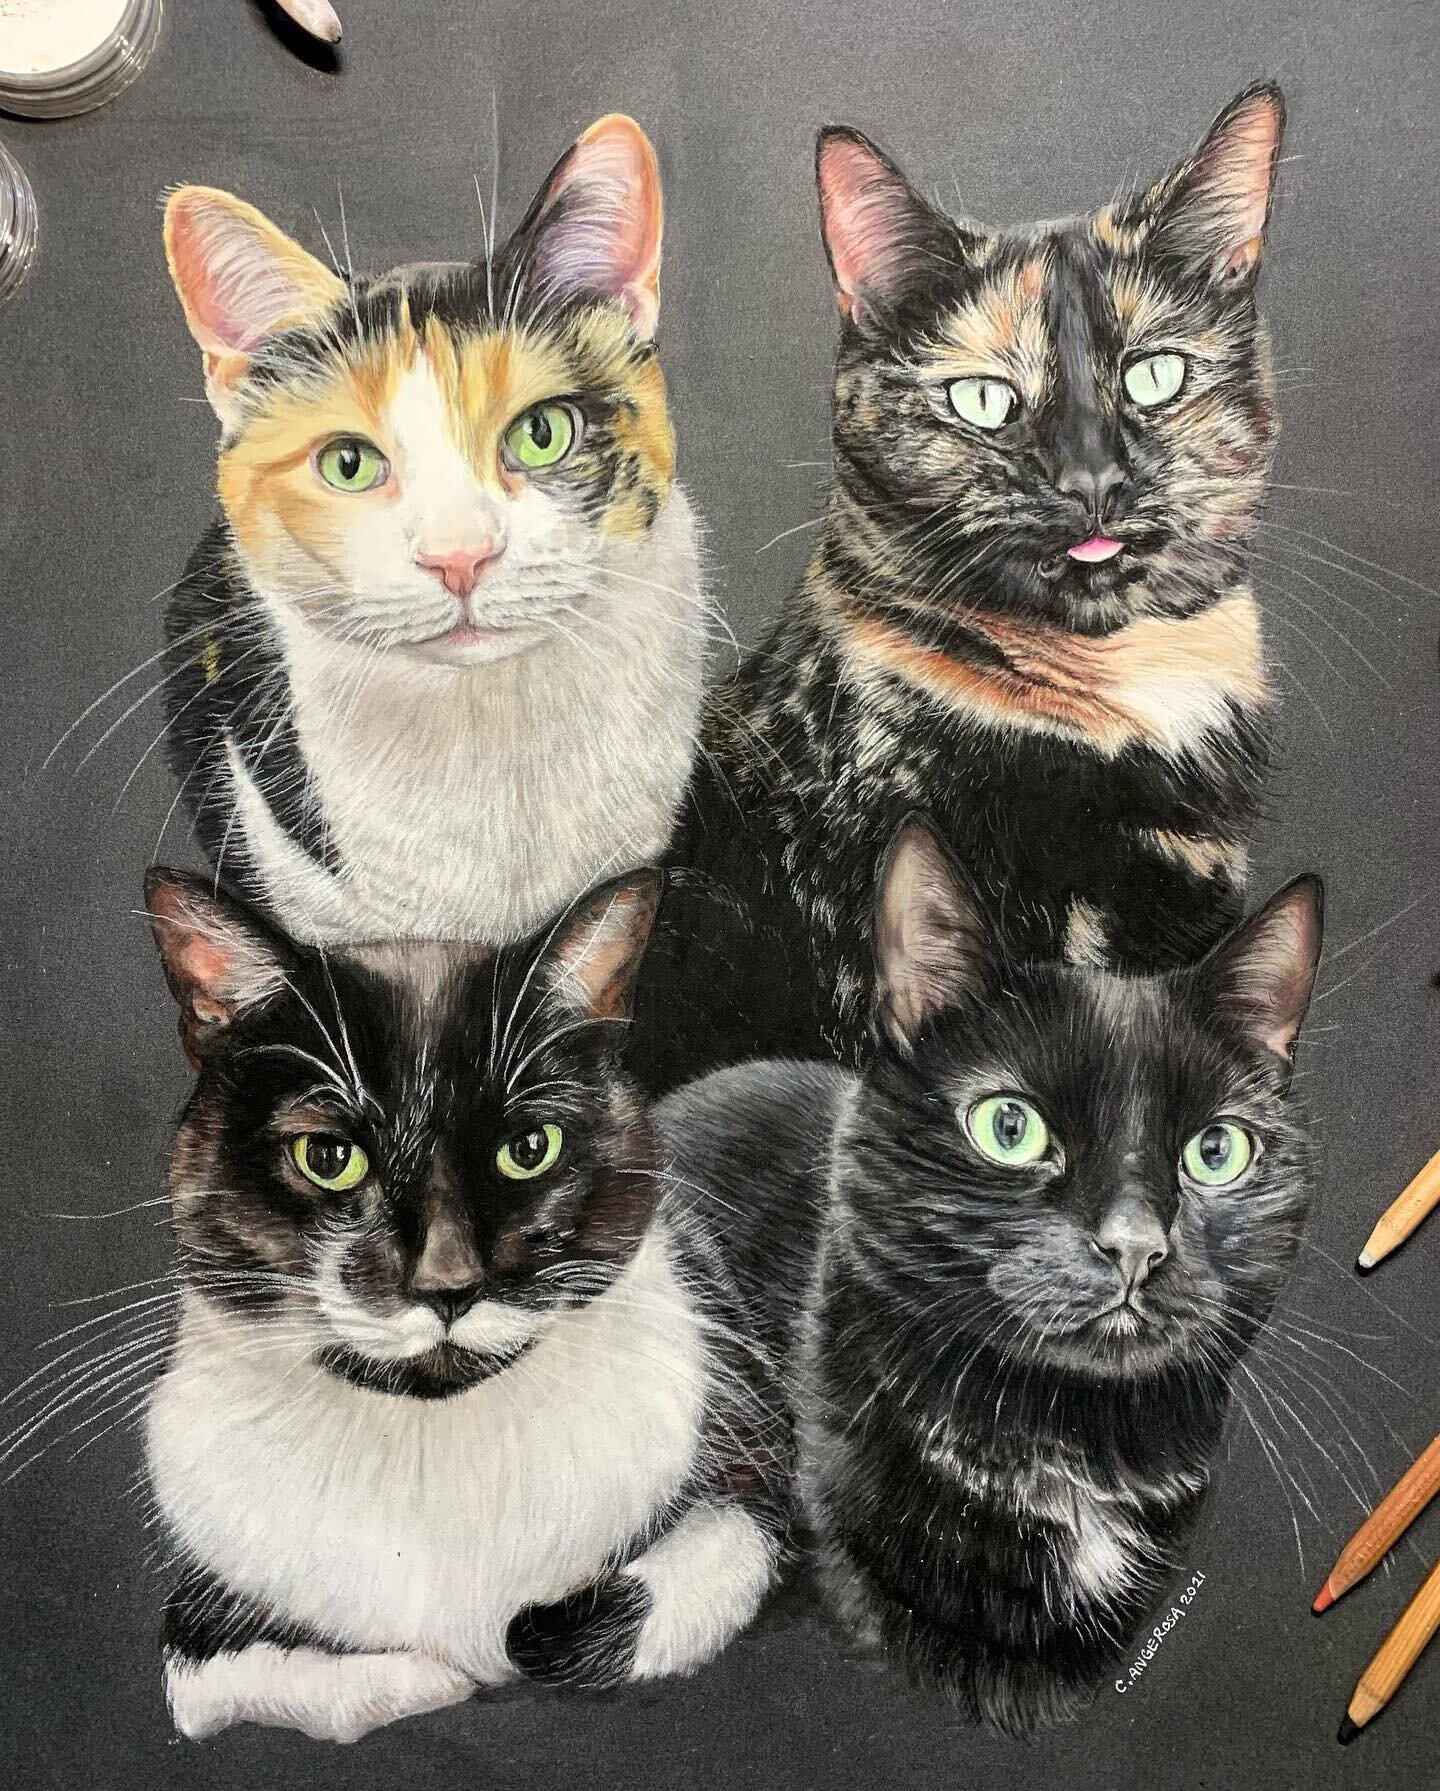 Here we have: Top left, Ollie, Top right, Arya
Bottom left, Chaplyn, Bottom right, Sho'nuff (Sho for short). This is one of the biggest portraits I have done yet! I wanted to take a cute picture of myself holding it like some of the other artists&rsq